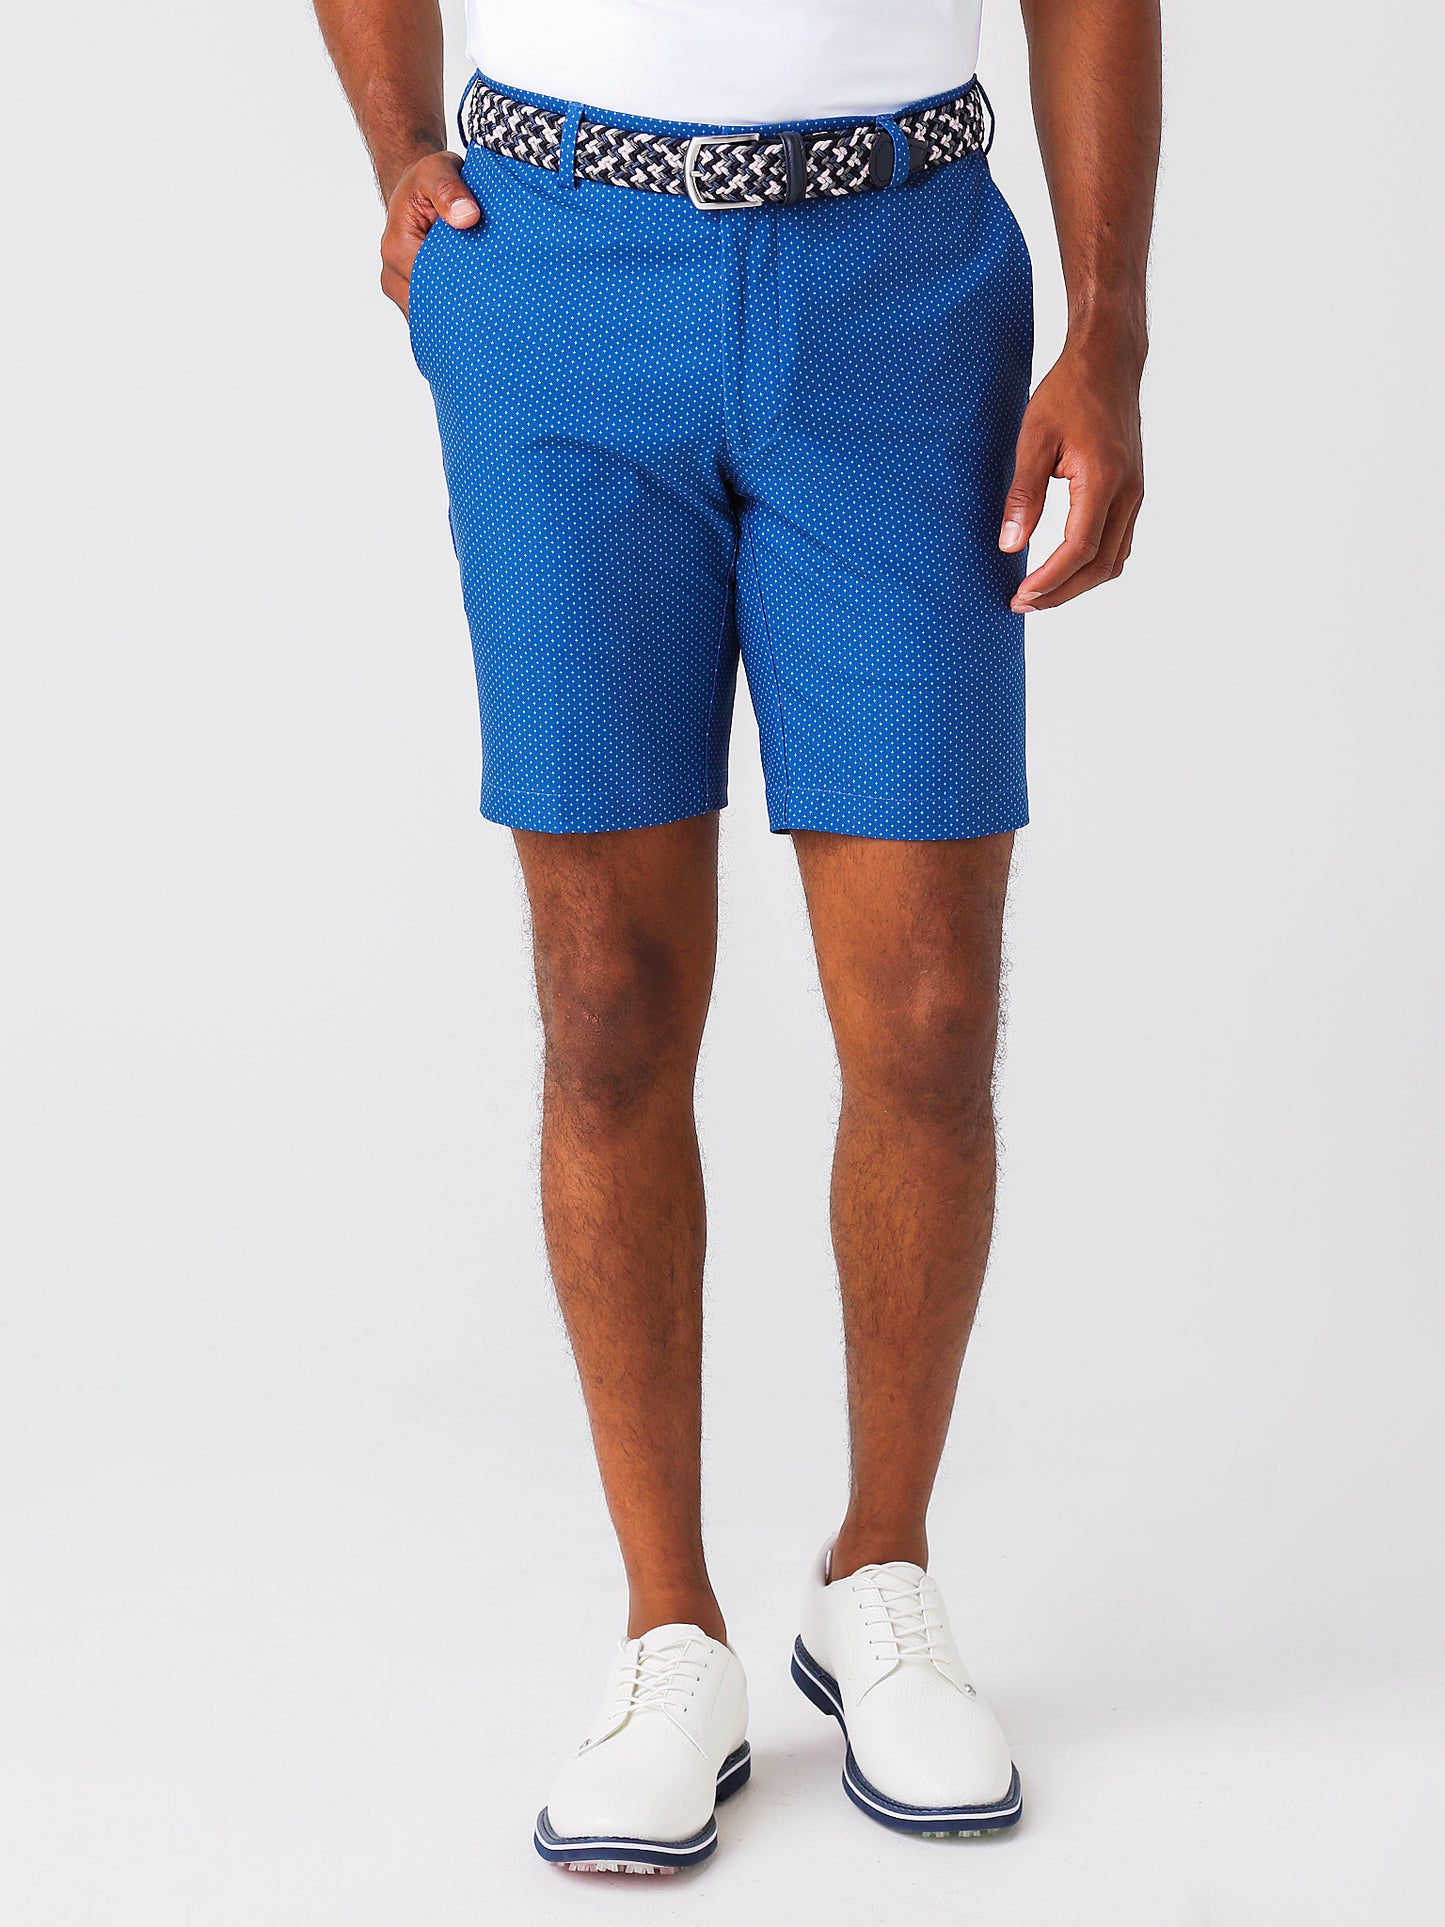 Peter Millar Crown Crafted Men's Stealth Star Performance Short